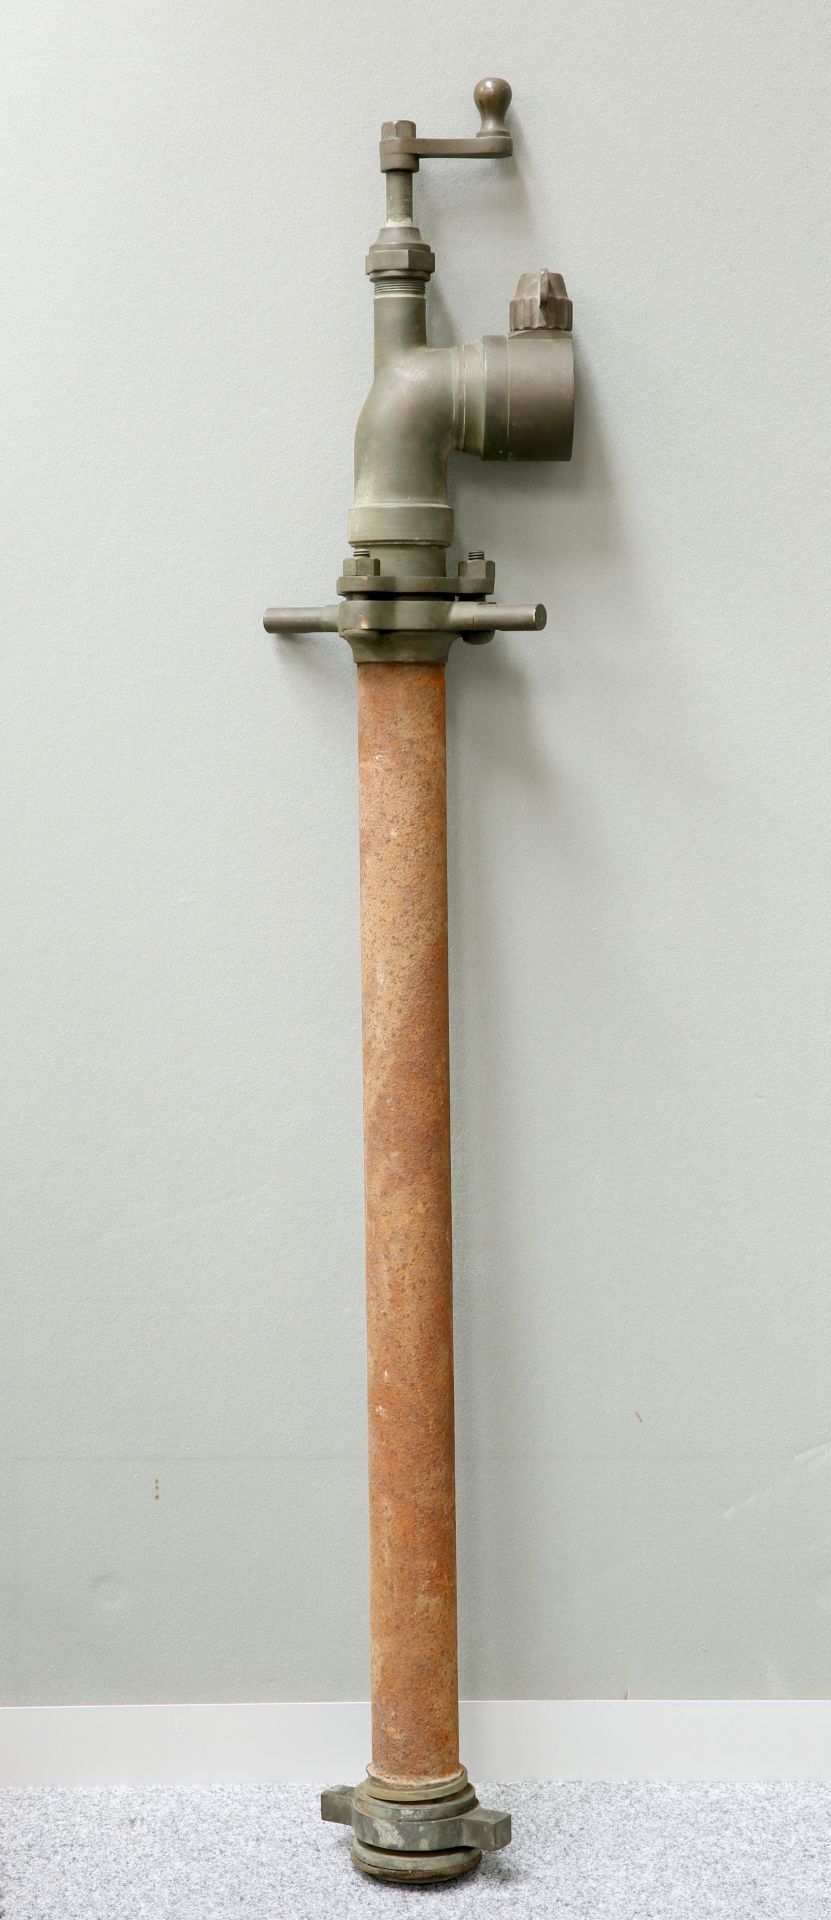 AN EARLY 20TH CENTURY BRONZE FIRE HYDRANT STAND PIPE. 128.5cm